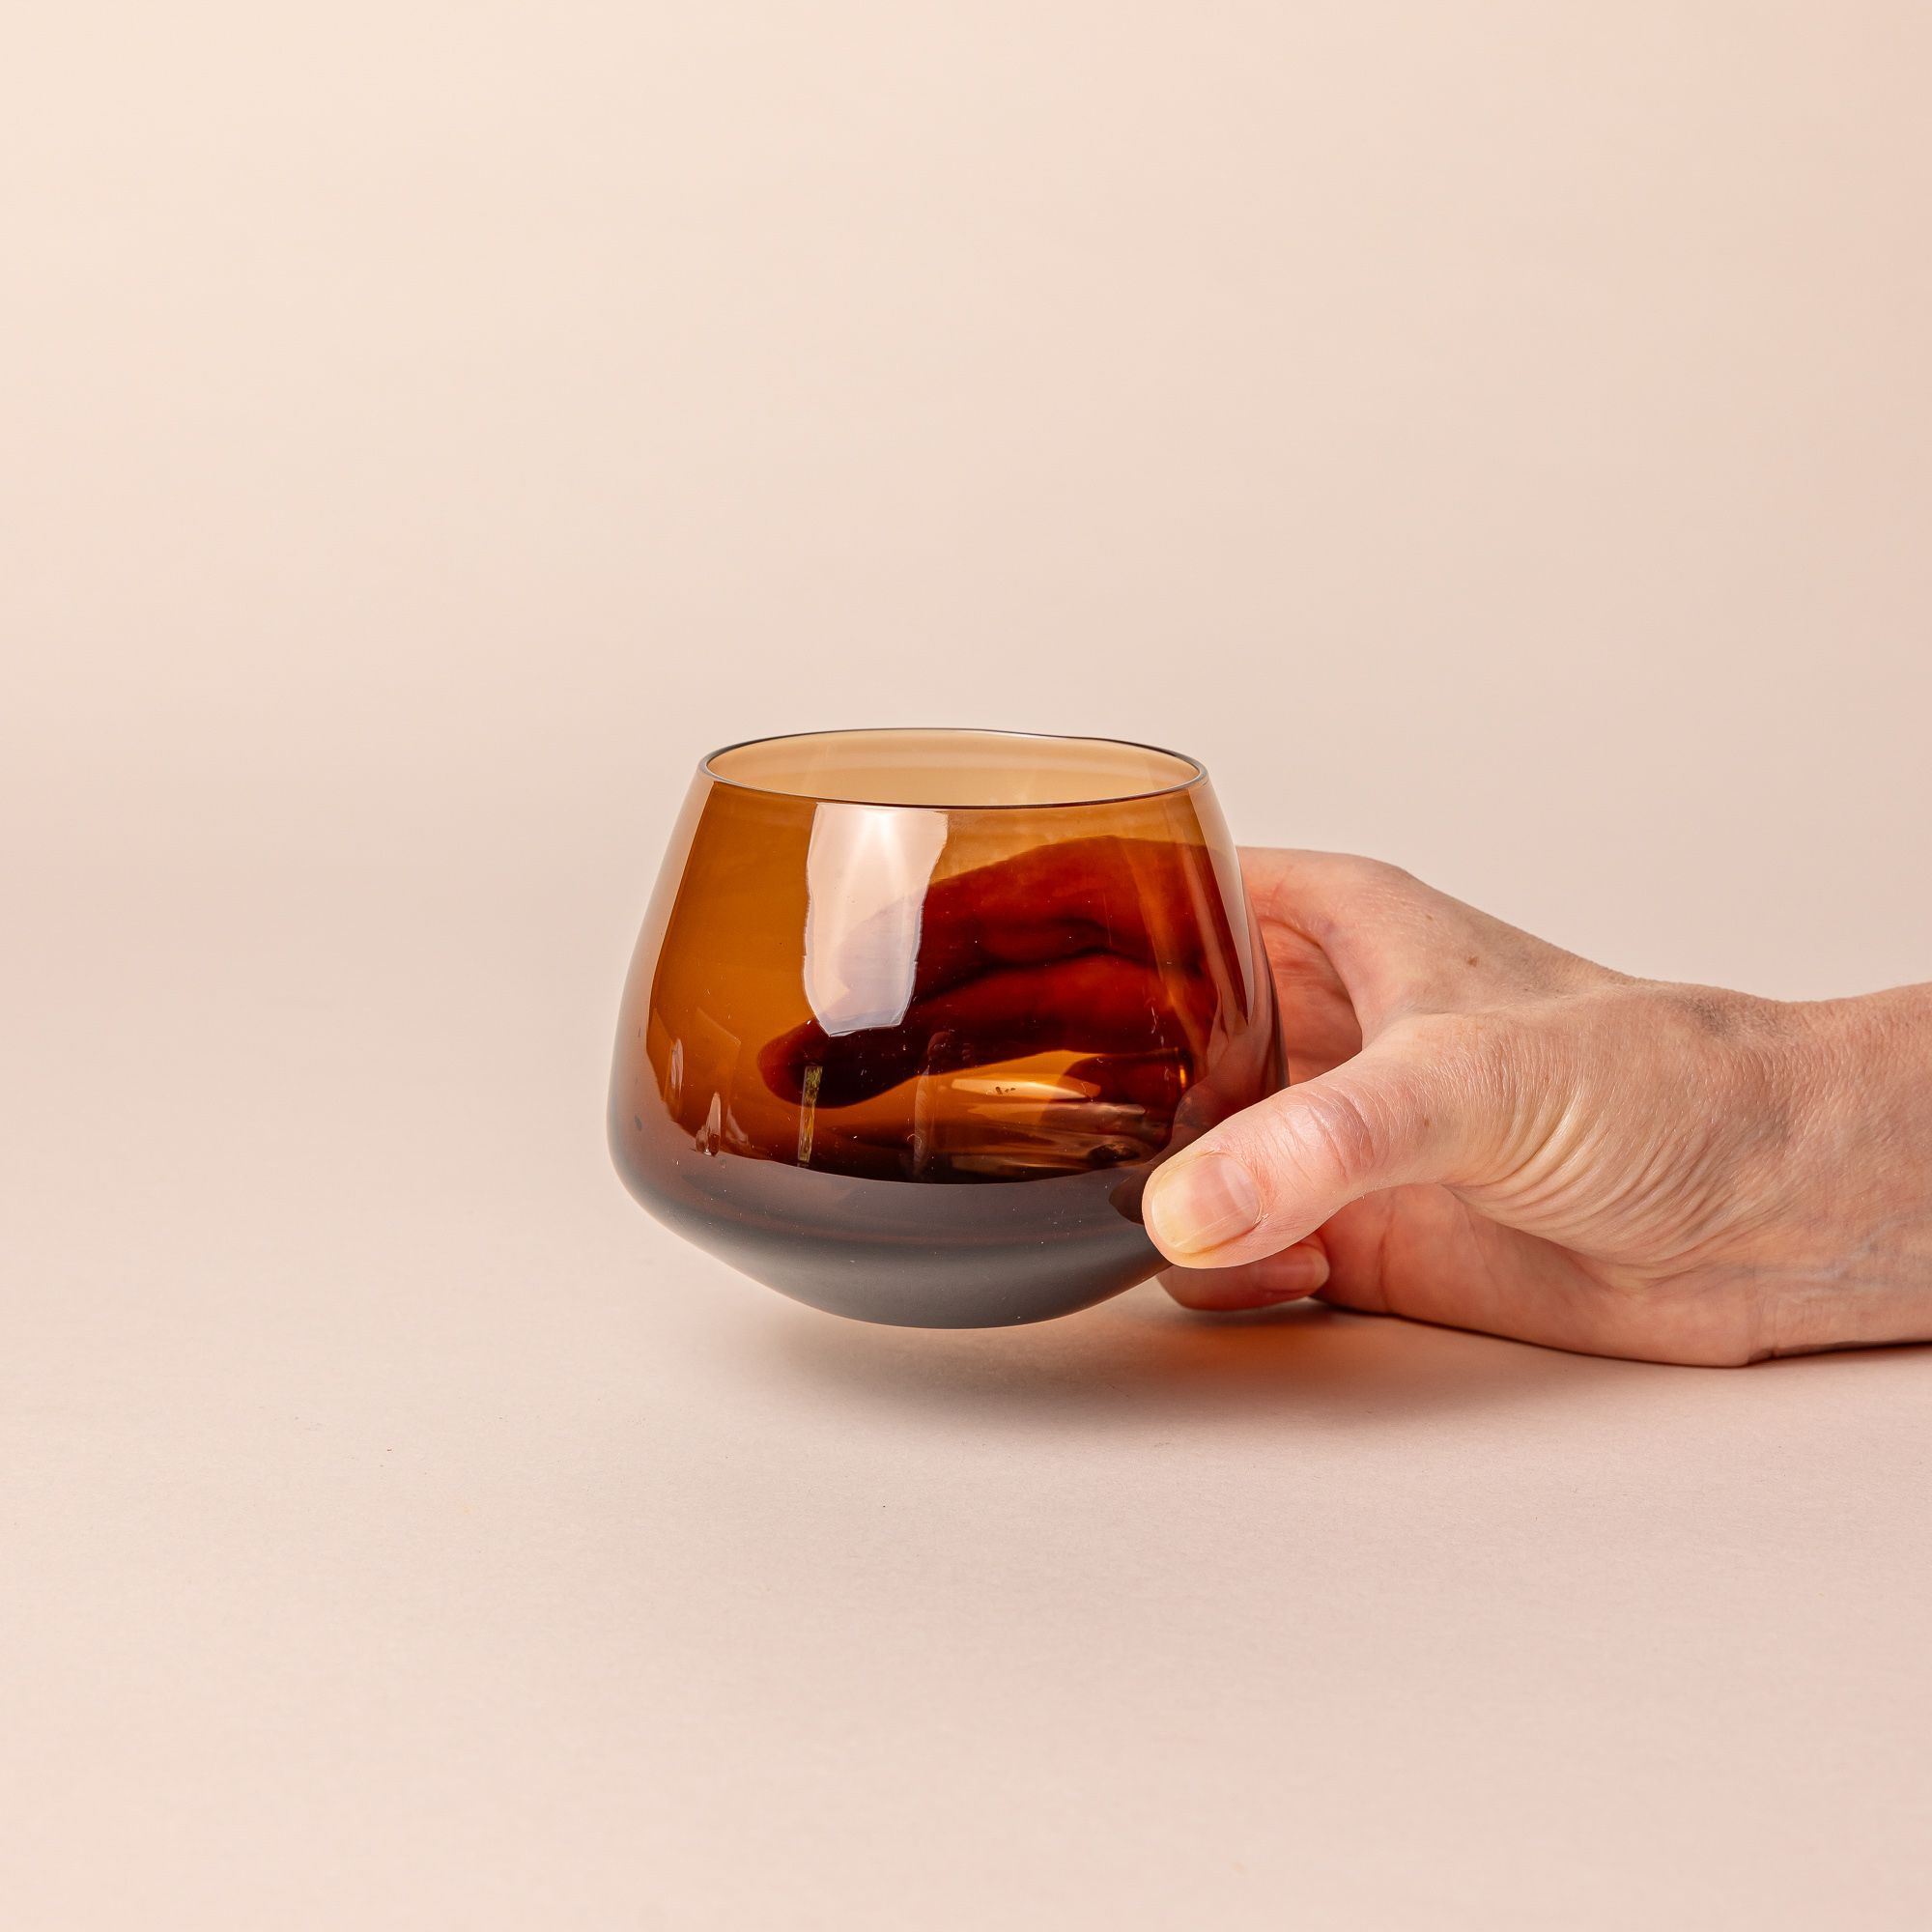 A hand holding a brown glass whiskey snifter with a rounded base